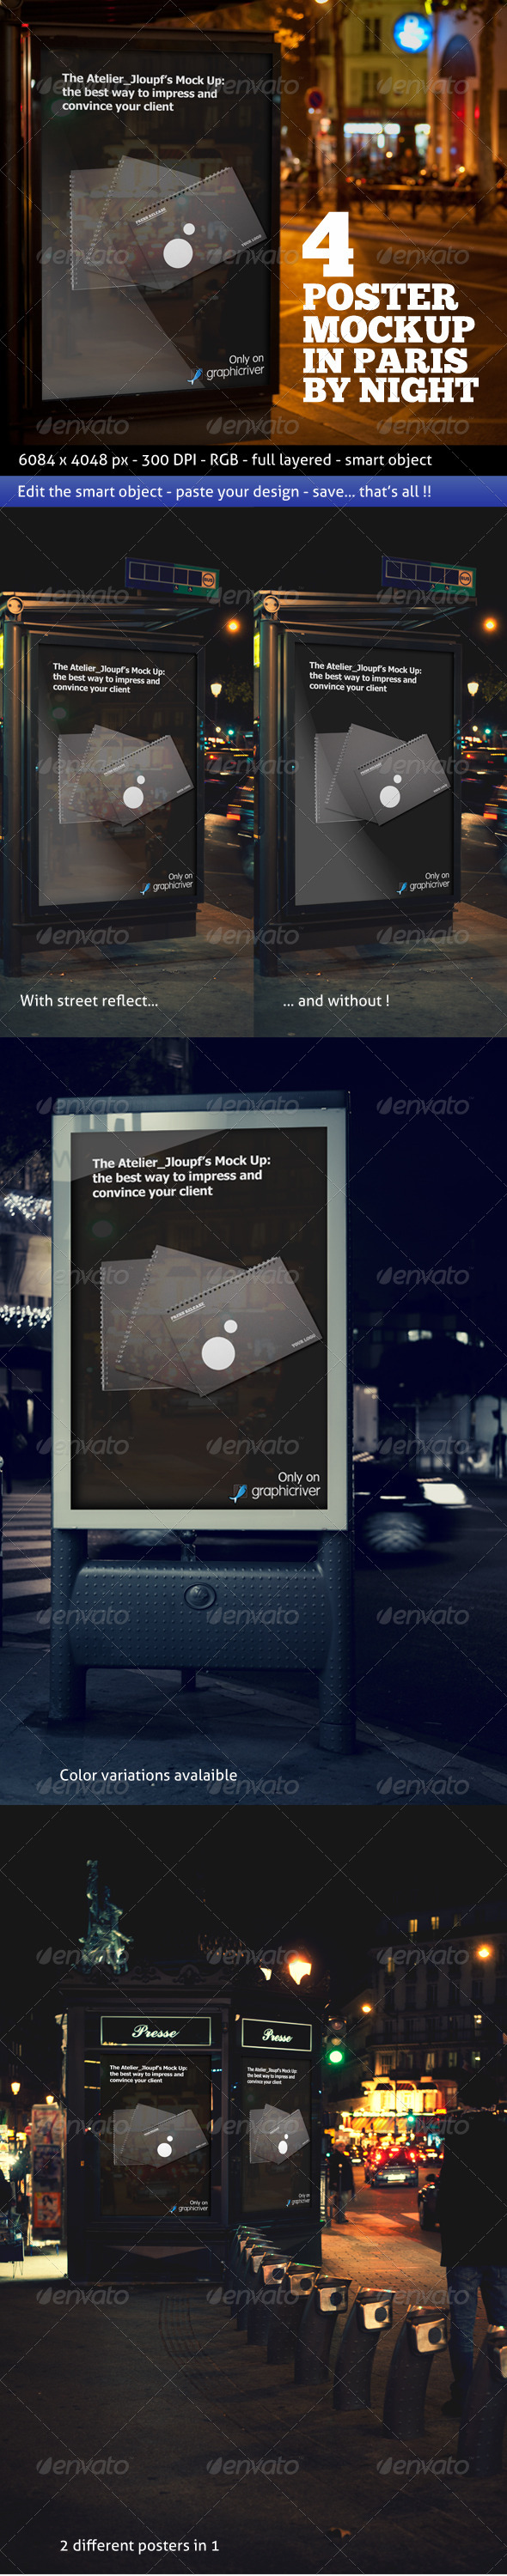 Photorealistic Poster Mockup In Paris By Night